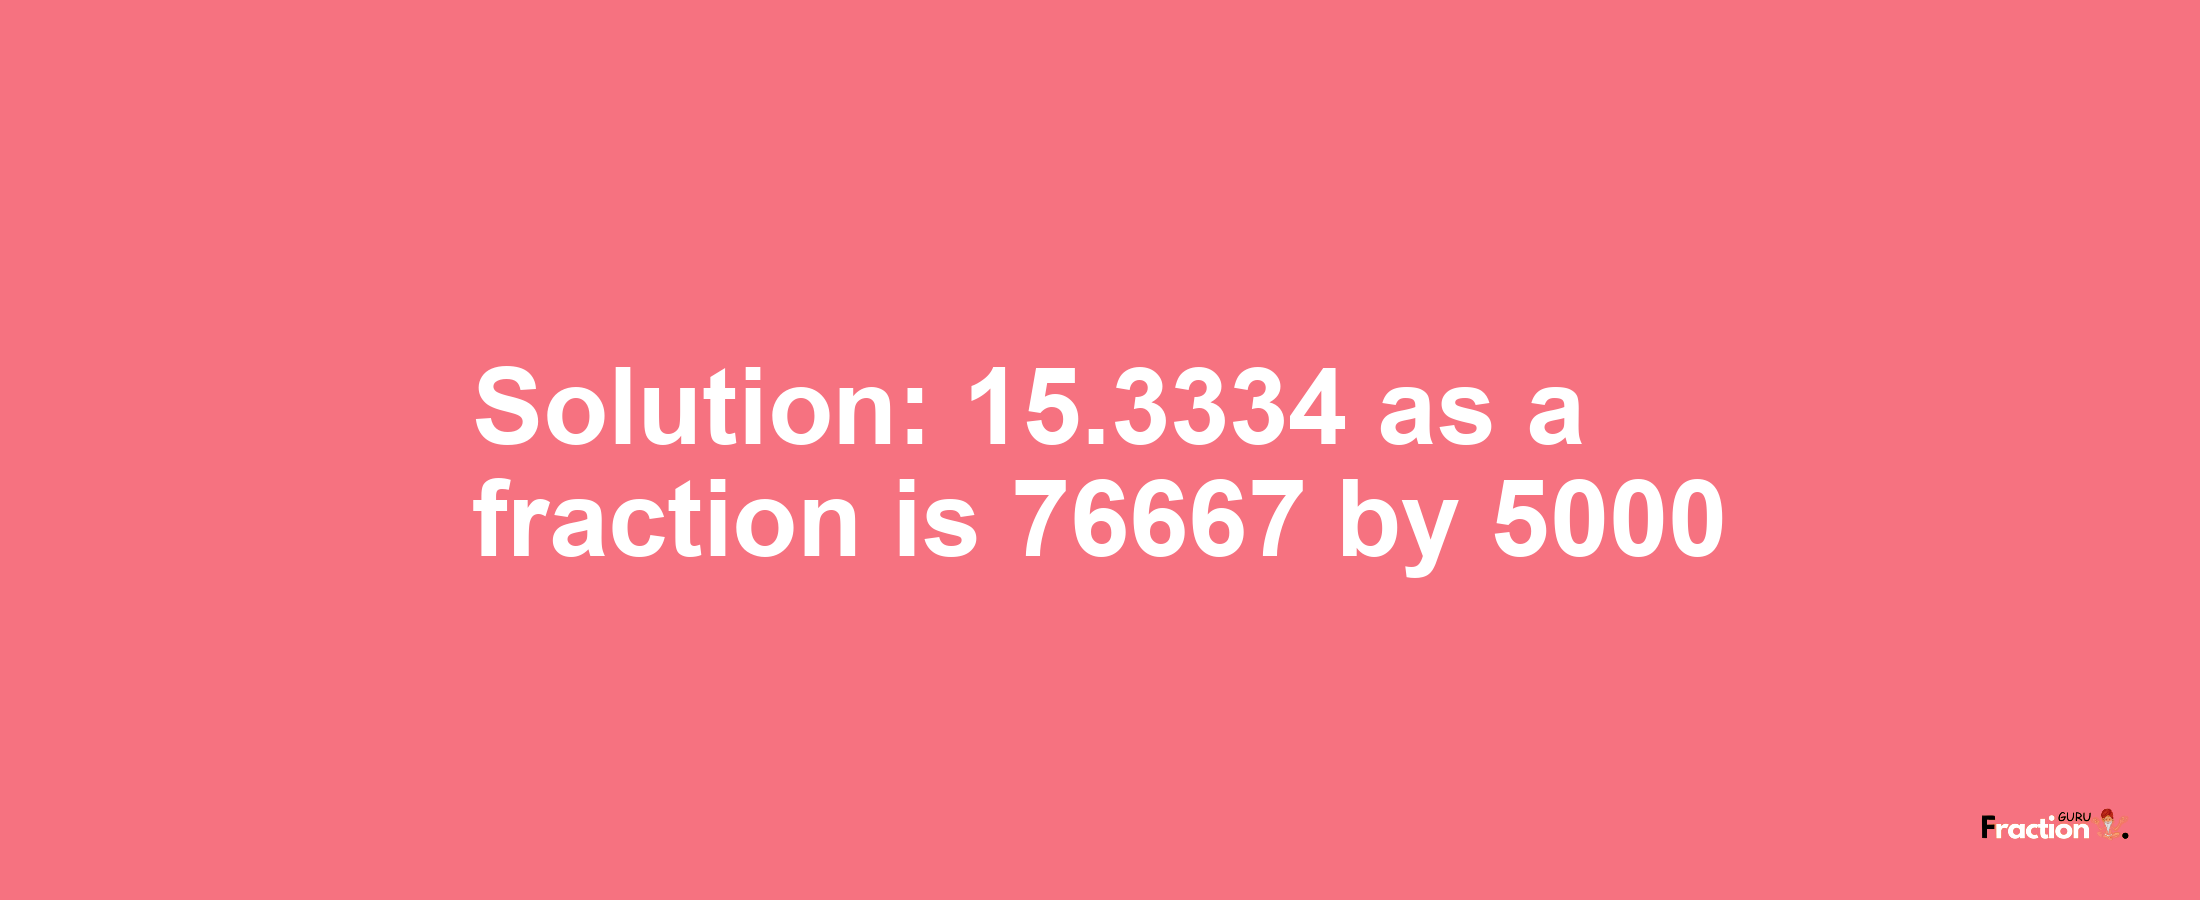 Solution:15.3334 as a fraction is 76667/5000